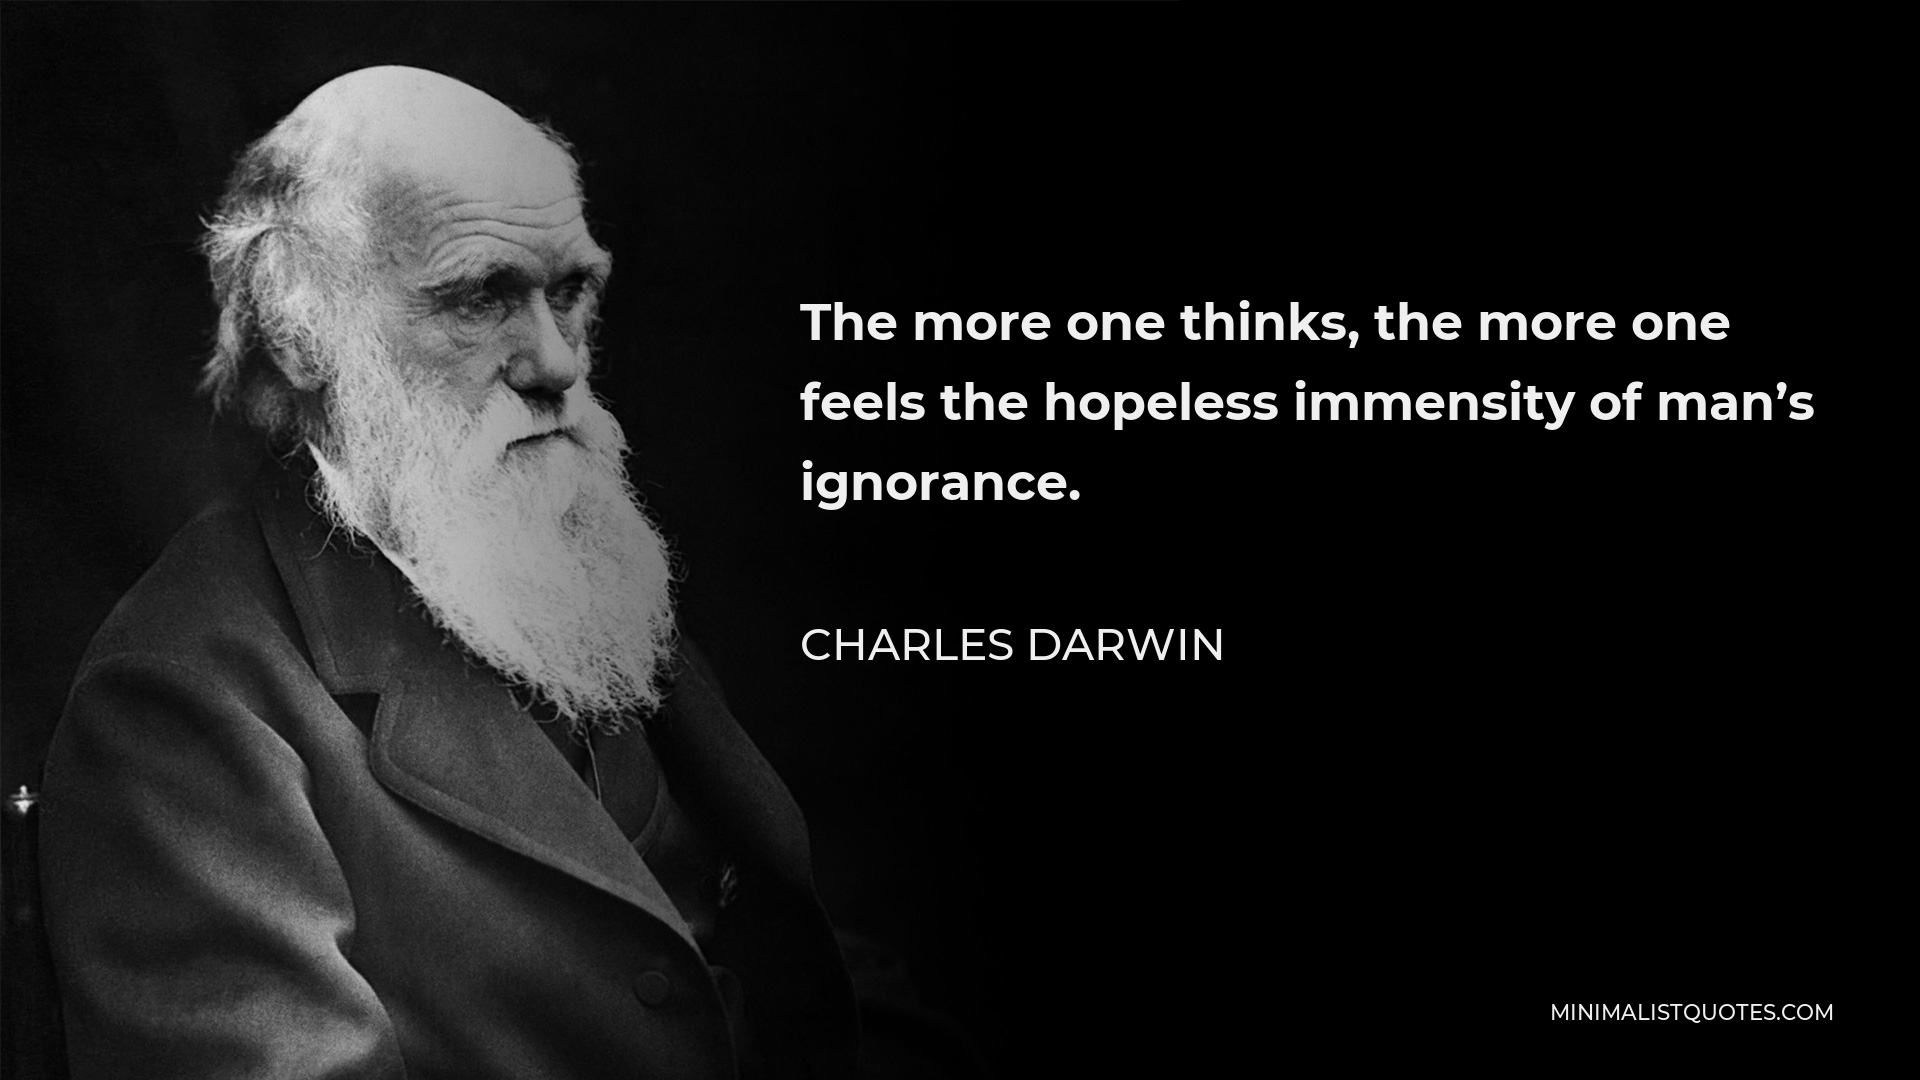 Charles Darwin Quote - The more one thinks, the more one feels the hopeless immensity of man’s ignorance.